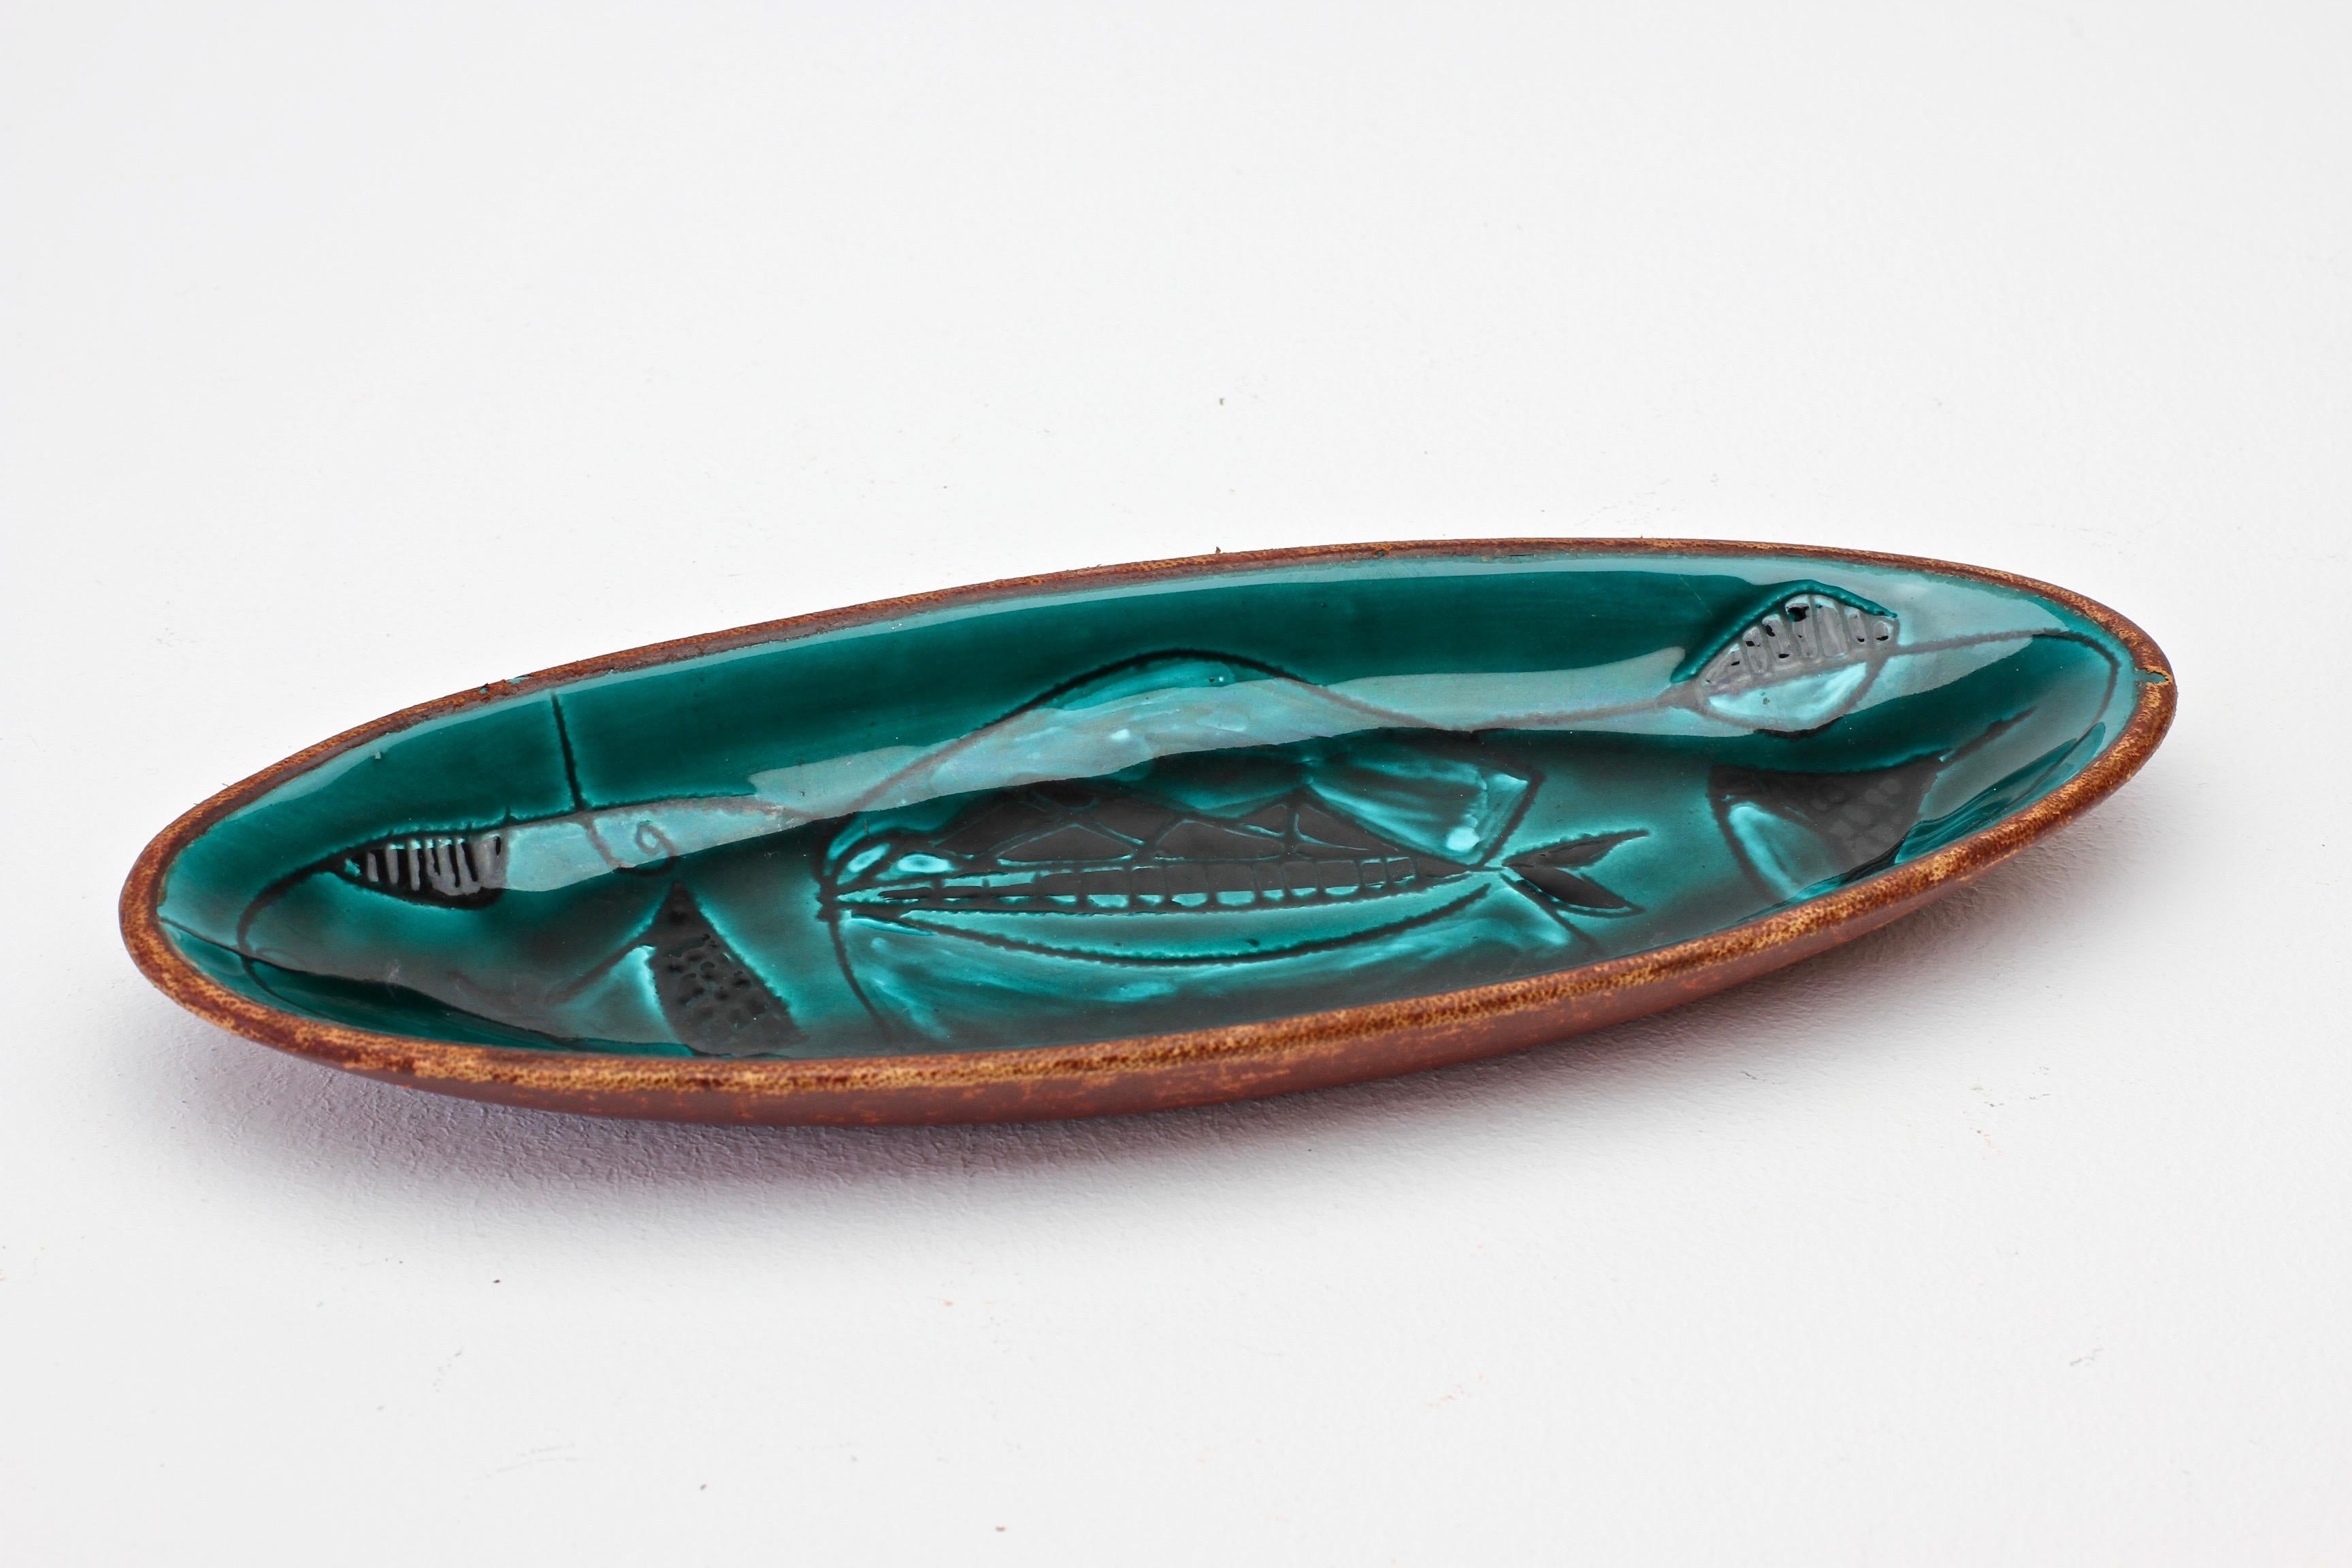 A beautiful ceramic serving bowl, dish or vide-poche wrapped and bound in a reddish brown stained leather, made in Italy, circa late 1950s-early 1960s, in the style of Marcello Fantoni.

Featuring a wonderful artistic design of fishes. Would be